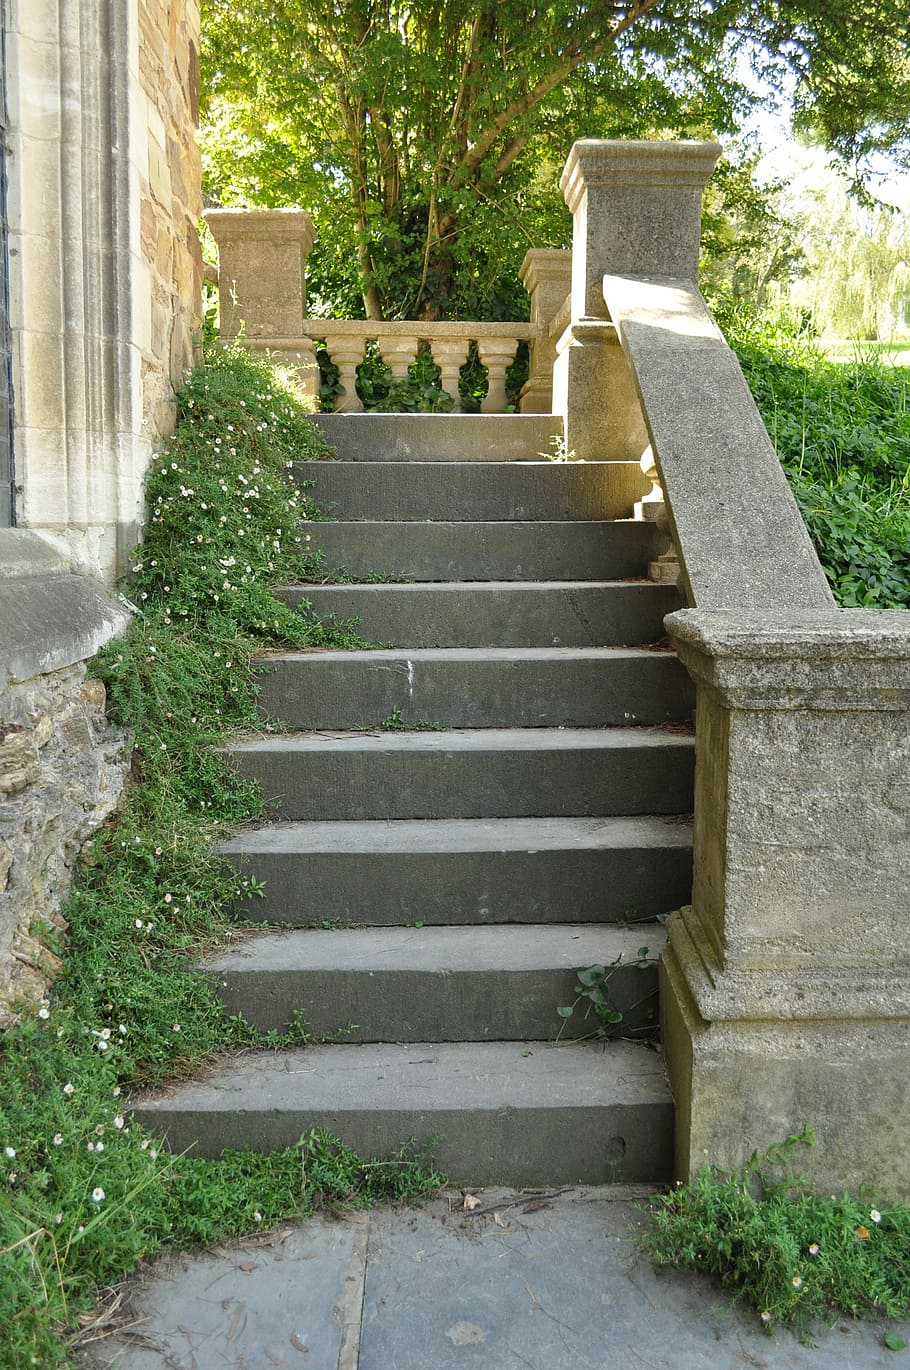 old, stone, steps, stairs, stairway, outside, architecture, stones, forest, slope